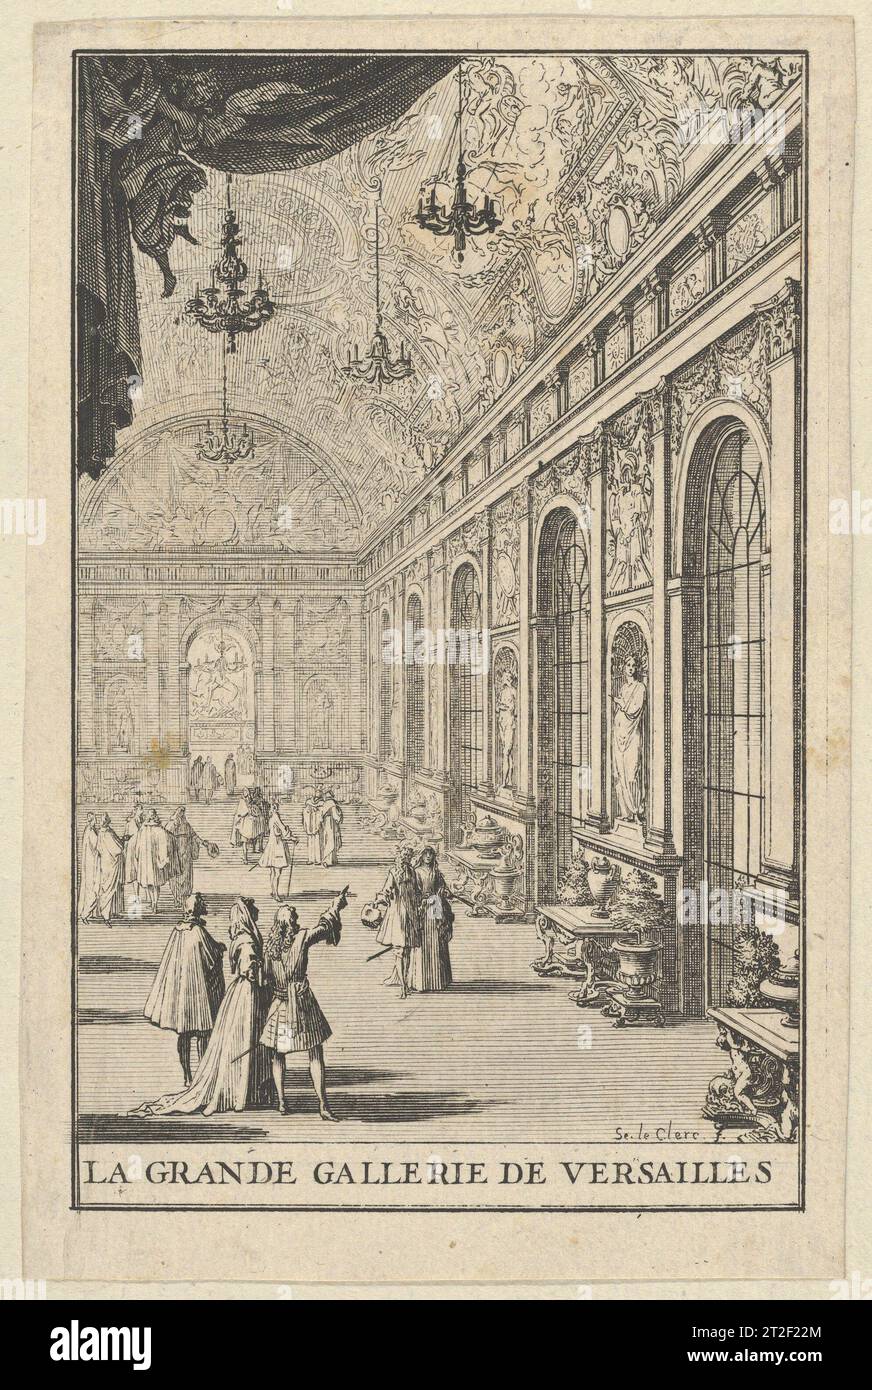 https://c8.alamy.com/comp/2T2F22M/galerie-des-glaces-at-versailles-sbastien-leclerc-i-french-1684-this-work-shows-the-interior-of-the-hall-of-mirrors-shortly-after-its-painted-ceiling-celebrating-louis-xivs-triumphs-was-completed-by-charles-le-brun-the-chandeliers-the-tables-placed-between-the-arched-topped-mirrors-and-the-flanking-tubs-for-the-orange-trees-were-made-of-solid-silver-all-the-silver-furnishings-at-versailles-were-melted-down-in-1789-in-order-to-finance-the-kings-military-campaigns-against-the-league-of-augsburg-2T2F22M.jpg